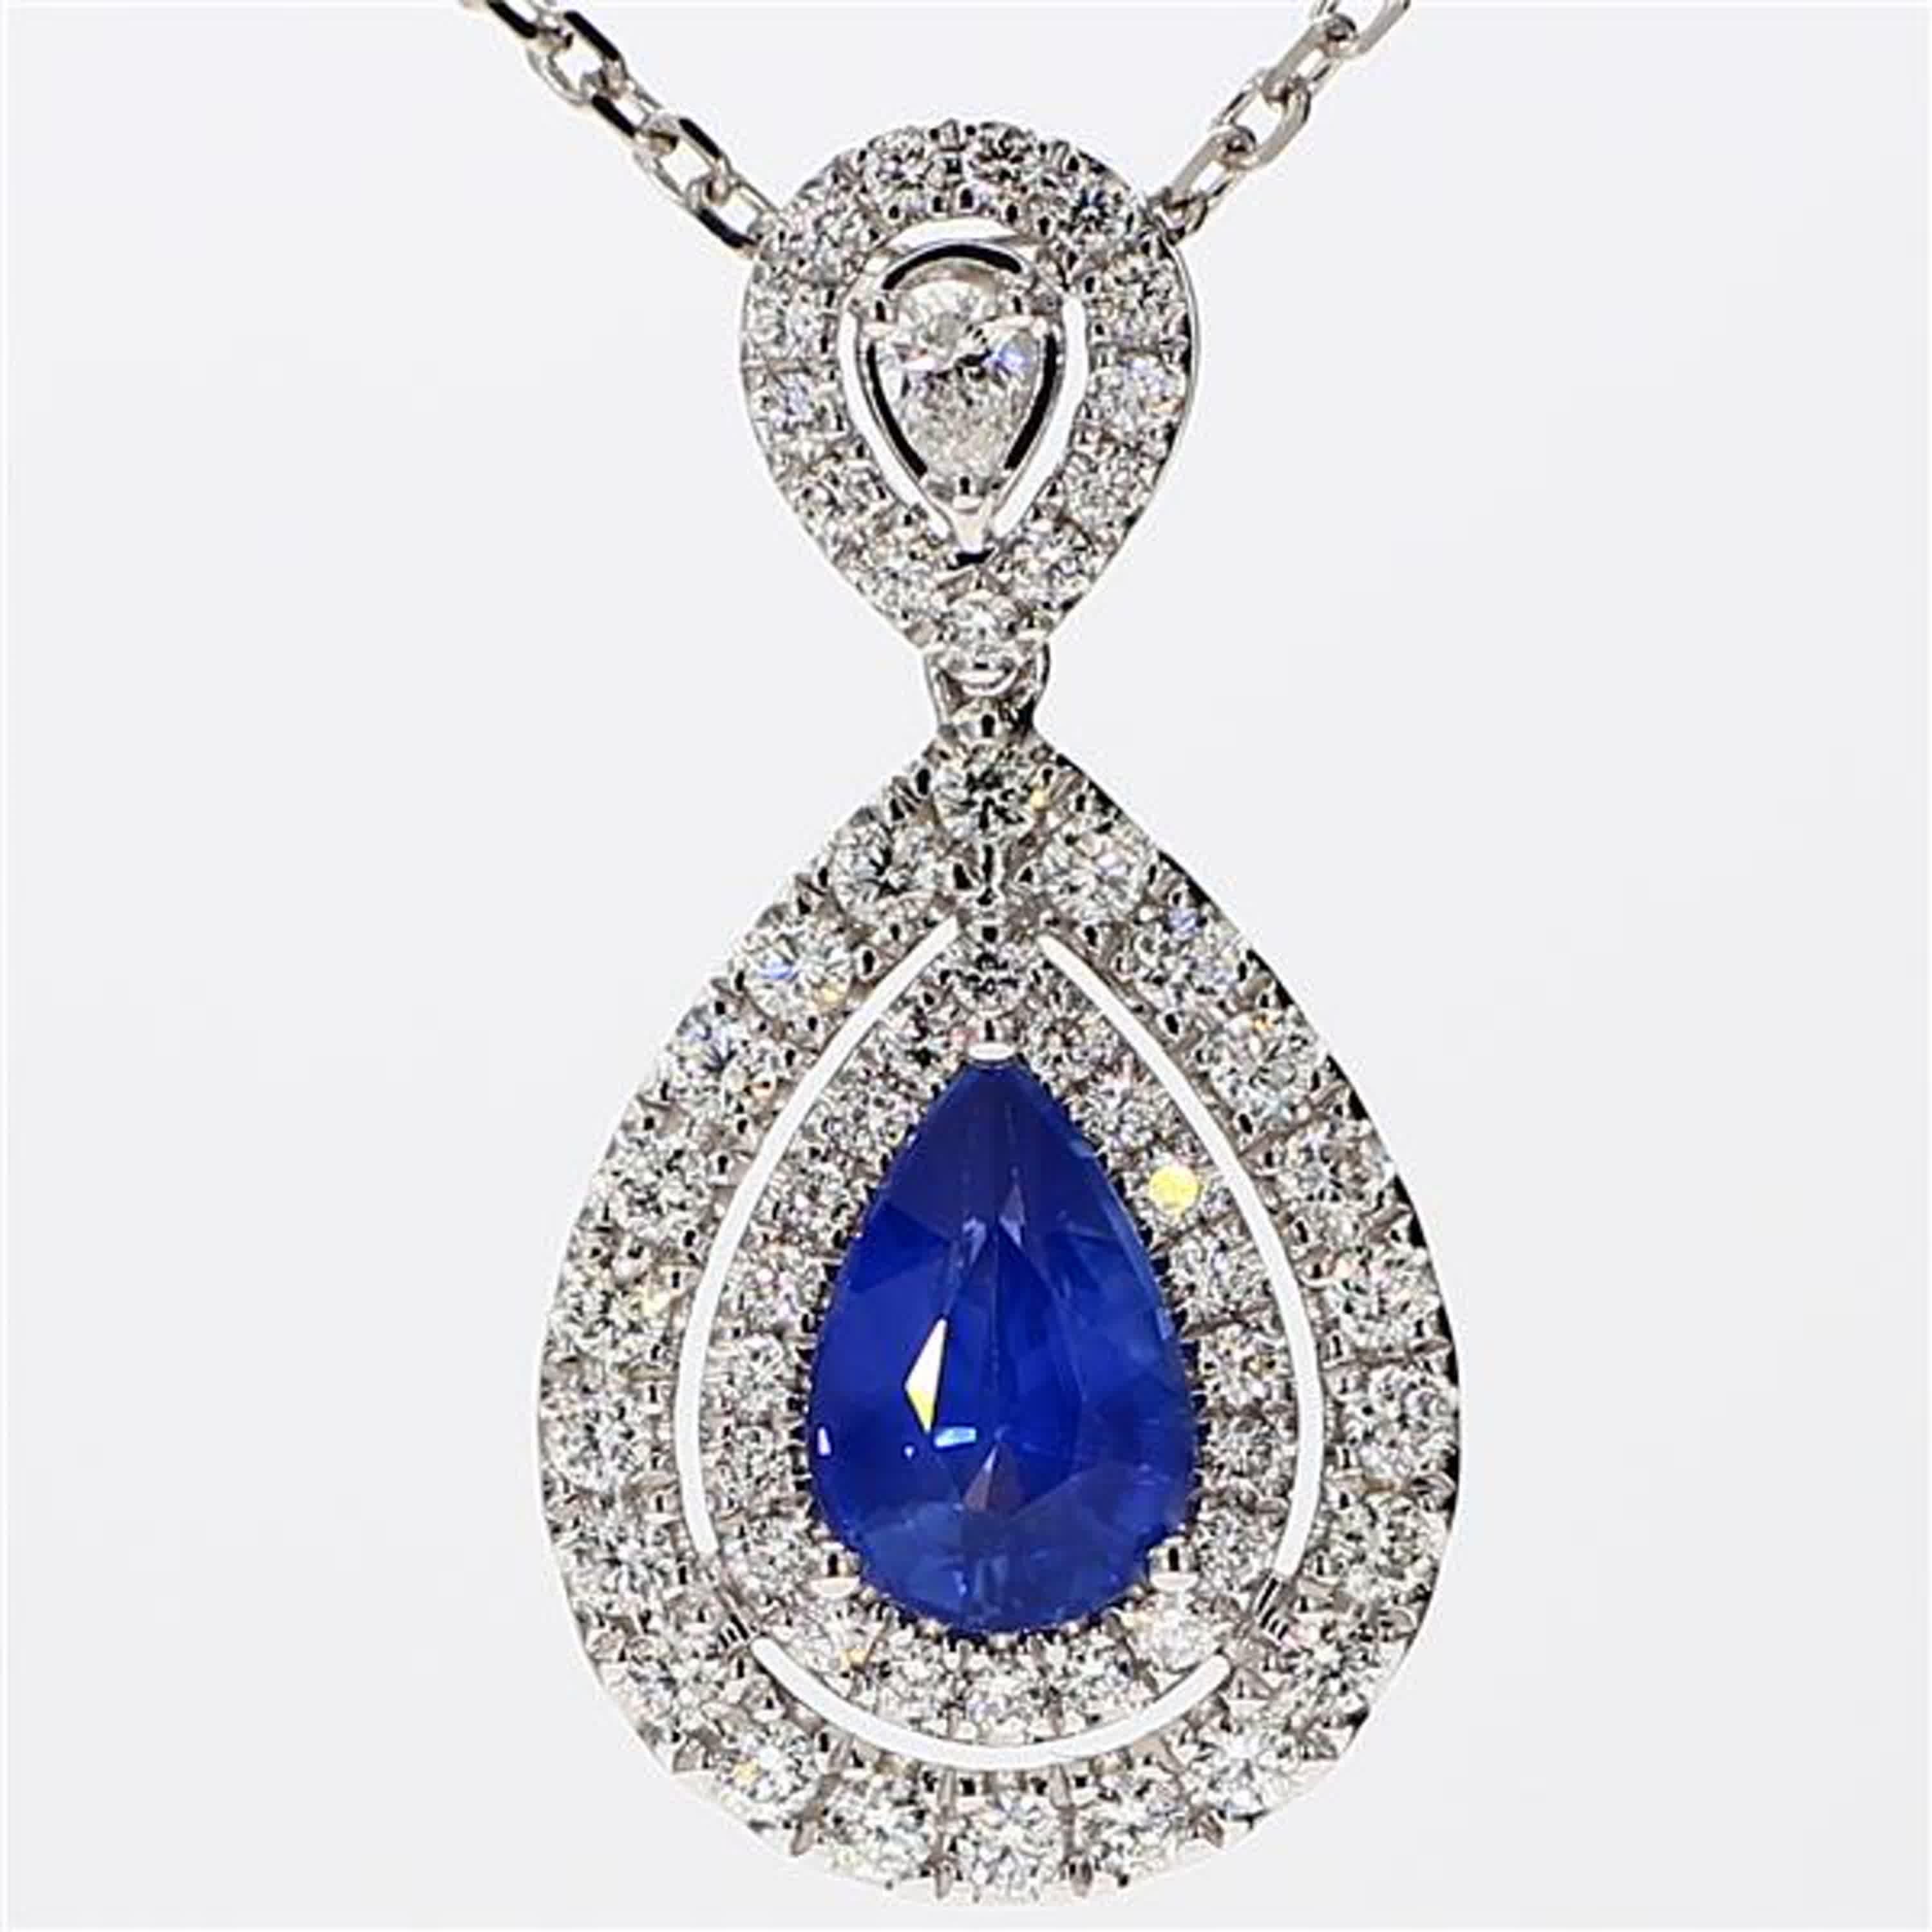 RareGemWorld's classic sapphire pendant. Mounted in a beautiful 18K White Gold setting with a natural pear cut blue sapphire. The sapphire is surrounded by natural round white diamond melee as well as a natural pear cut white diamond. This pendant